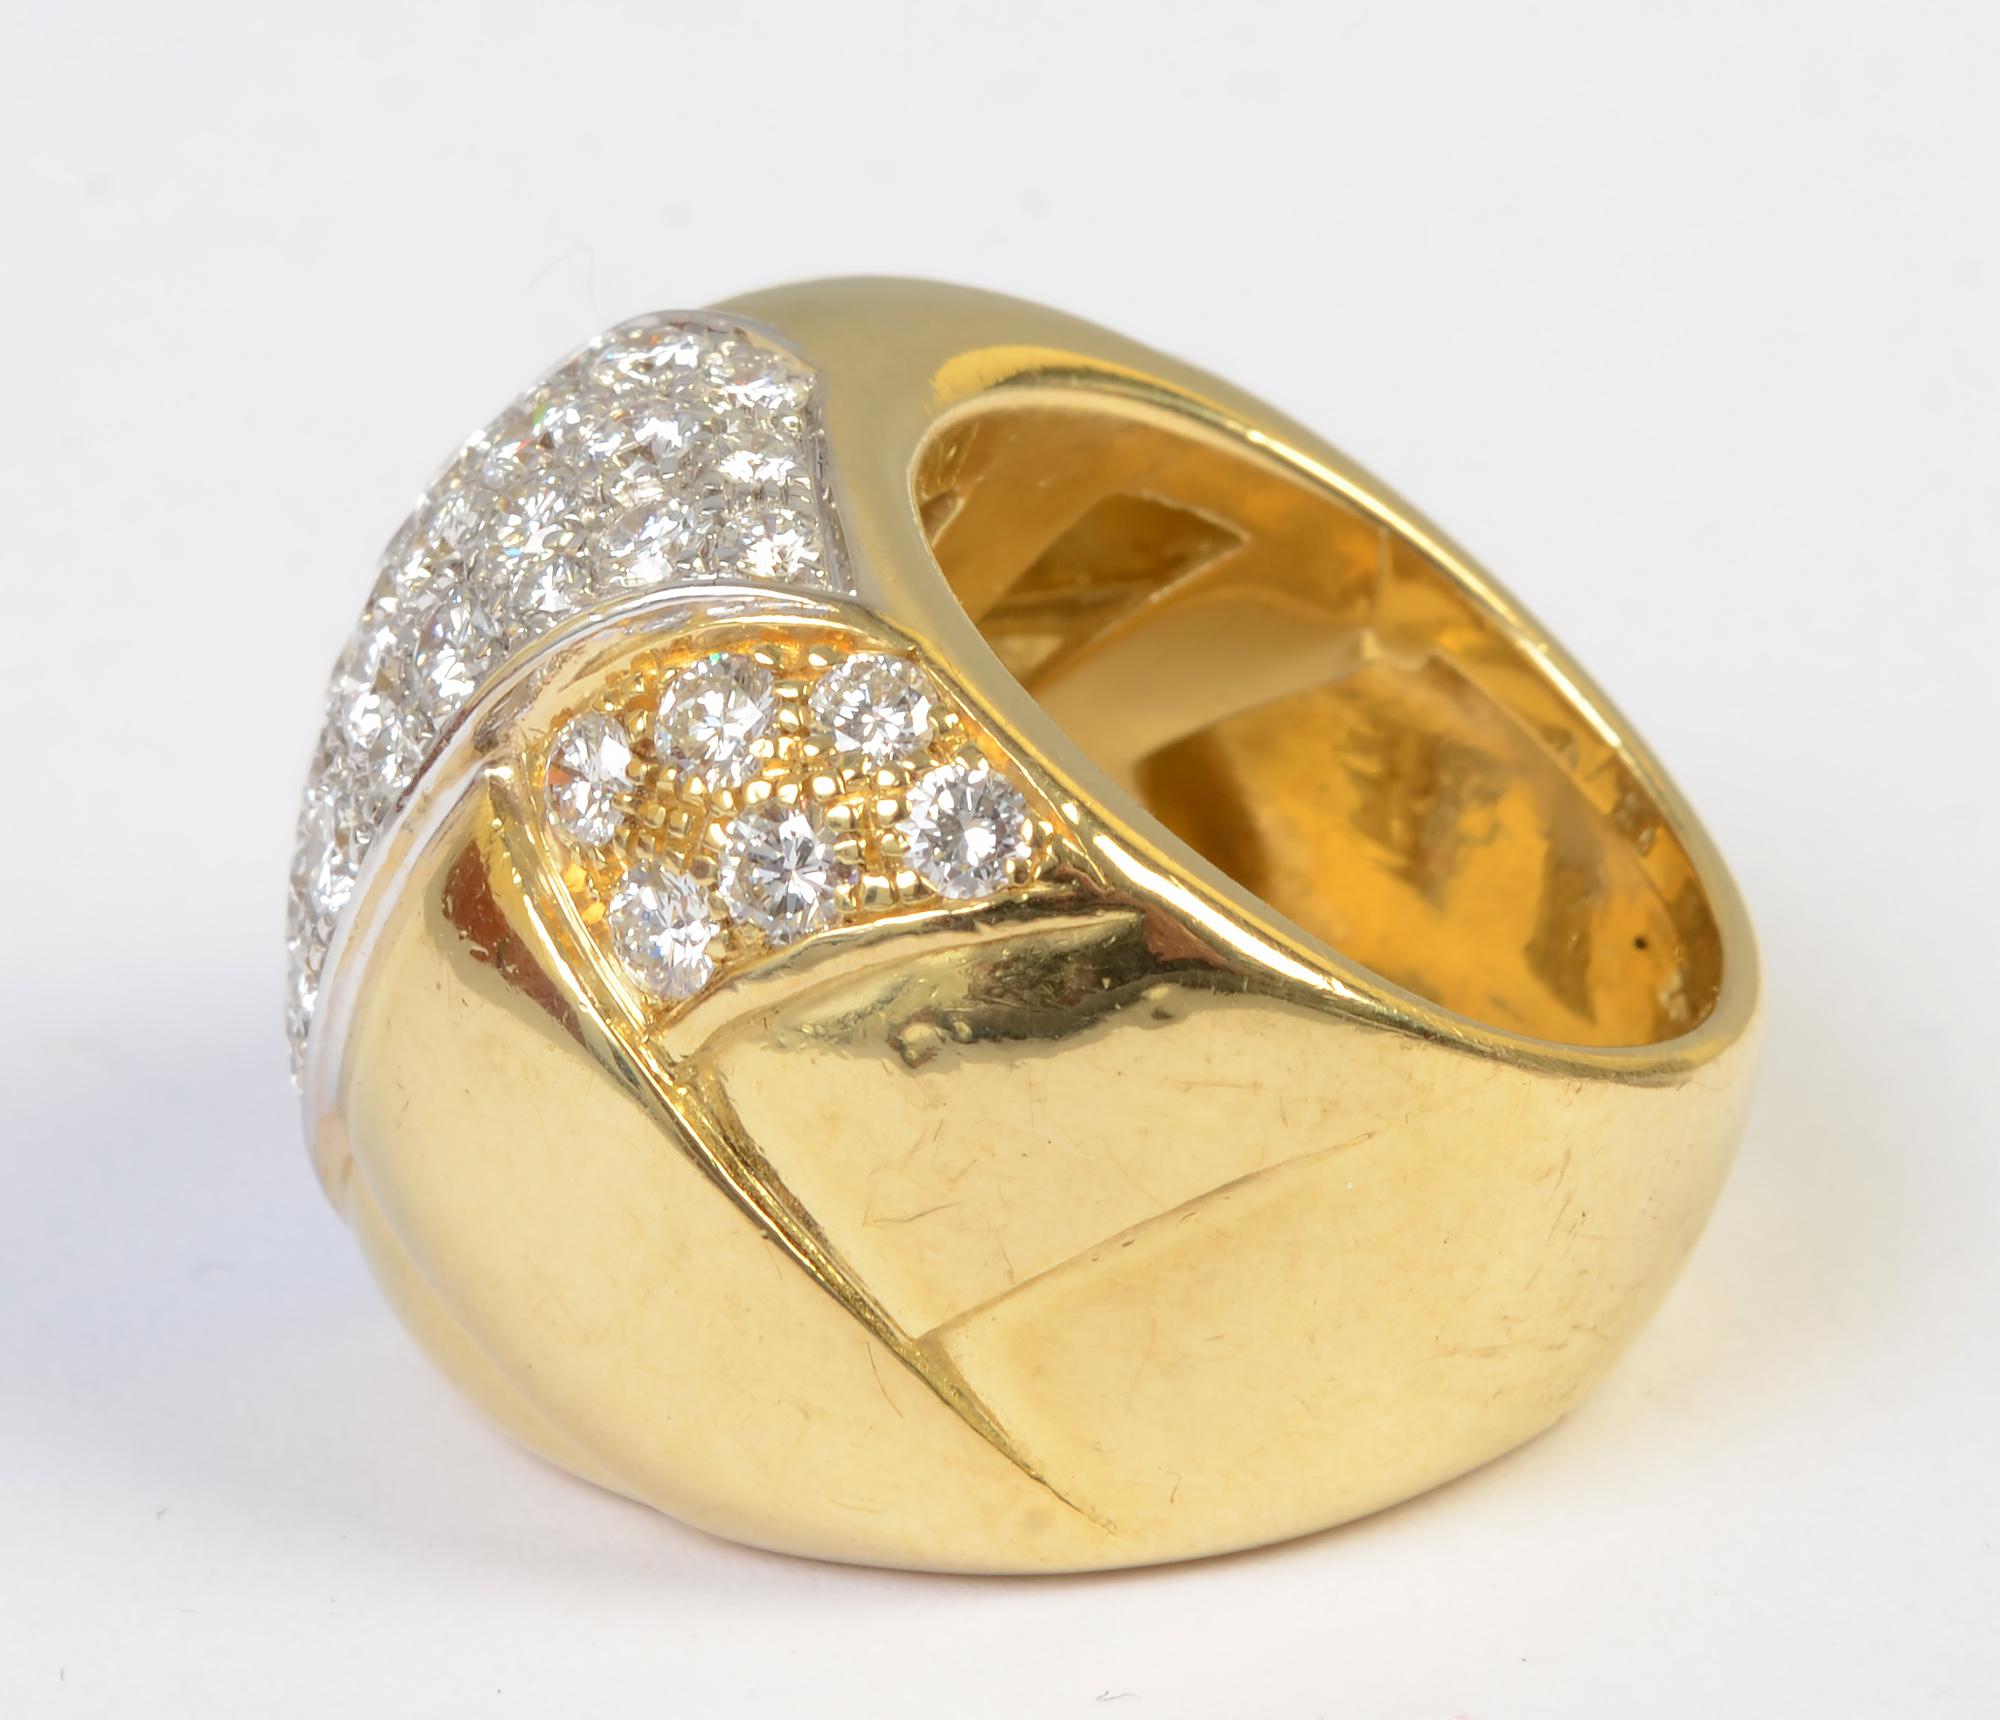 Absolutely eye dazzling wide band gold ring with 4.25 carats of VS diamonds; F color. The ring is domed and has a slightly braided design in the gold. The diamonds are set on a diagonal with smaller clusters of inset stones on either side. The front